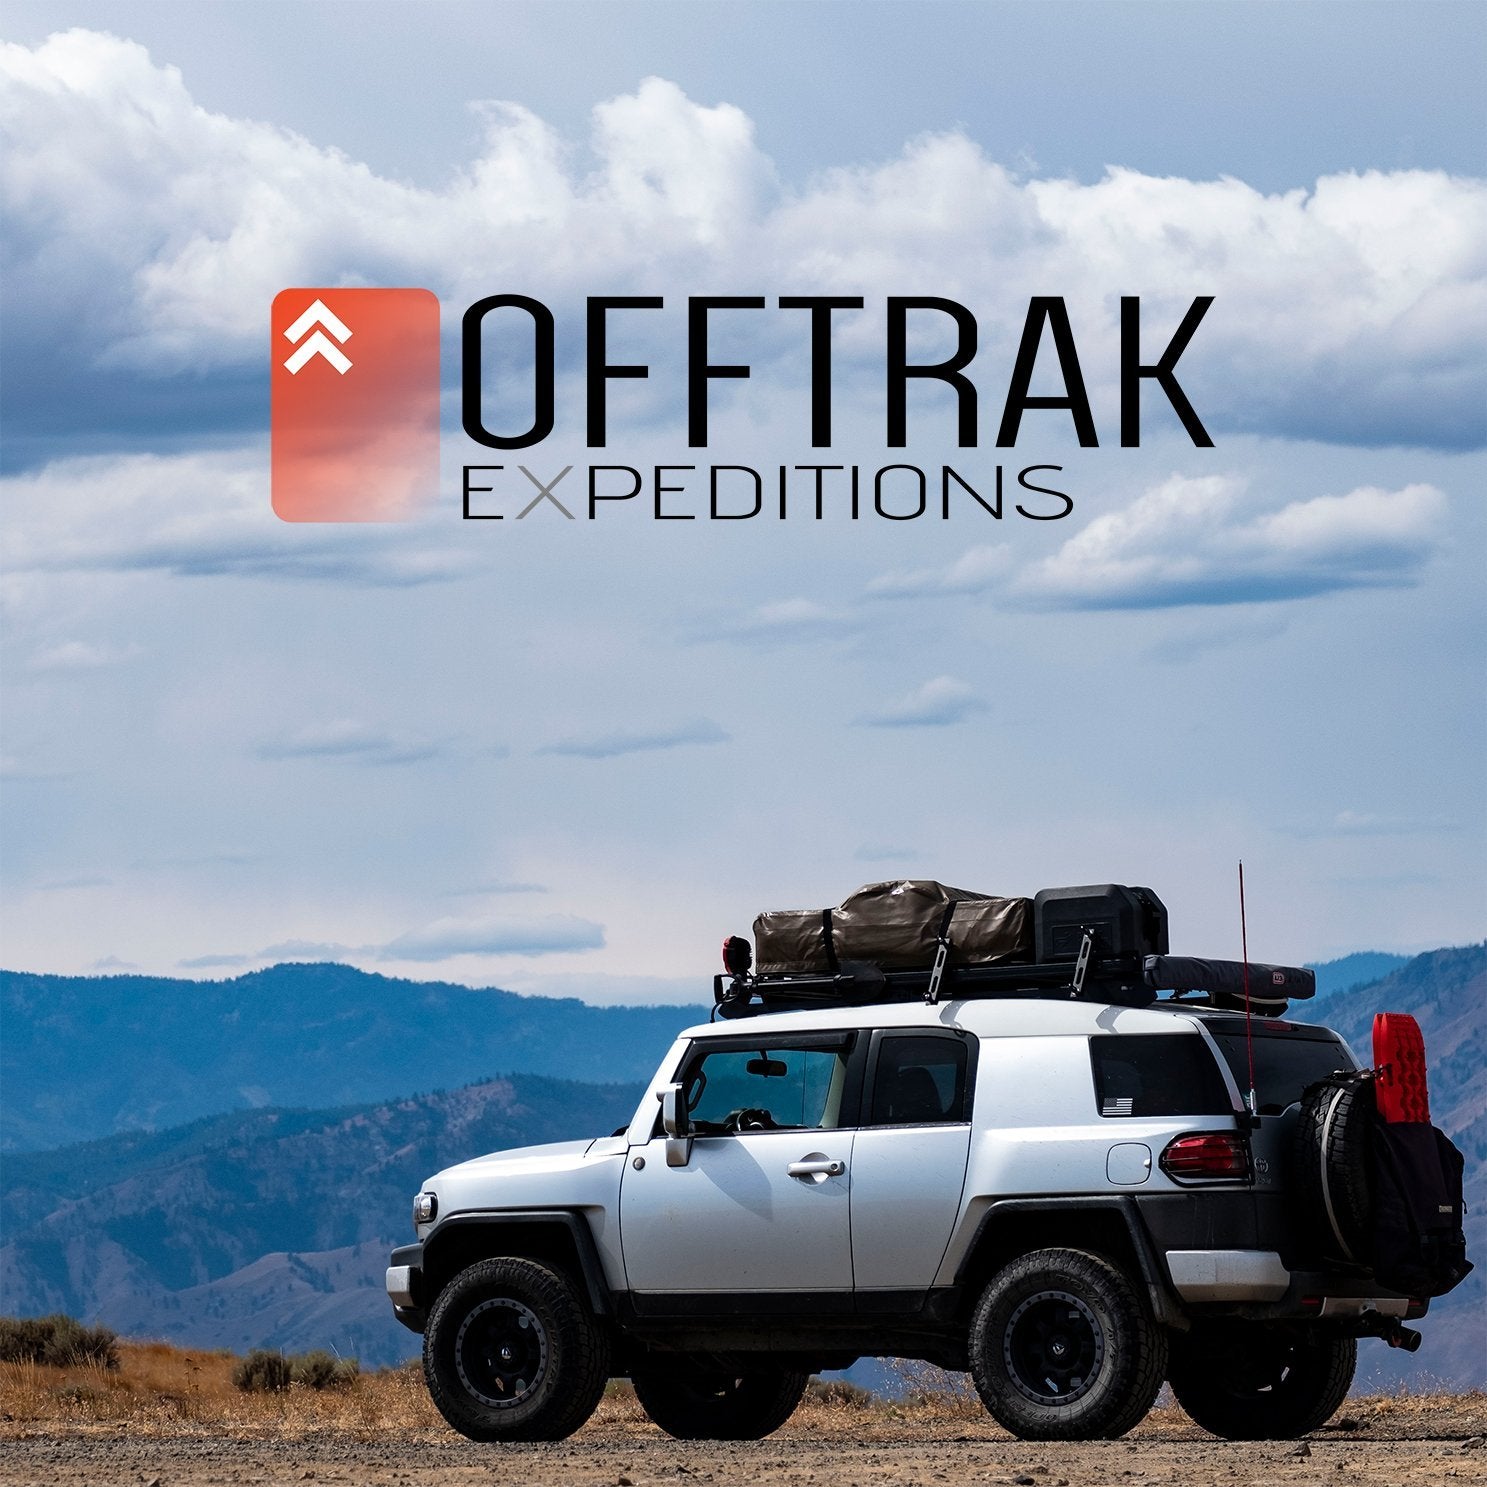 www.offtrakexpeditions.com